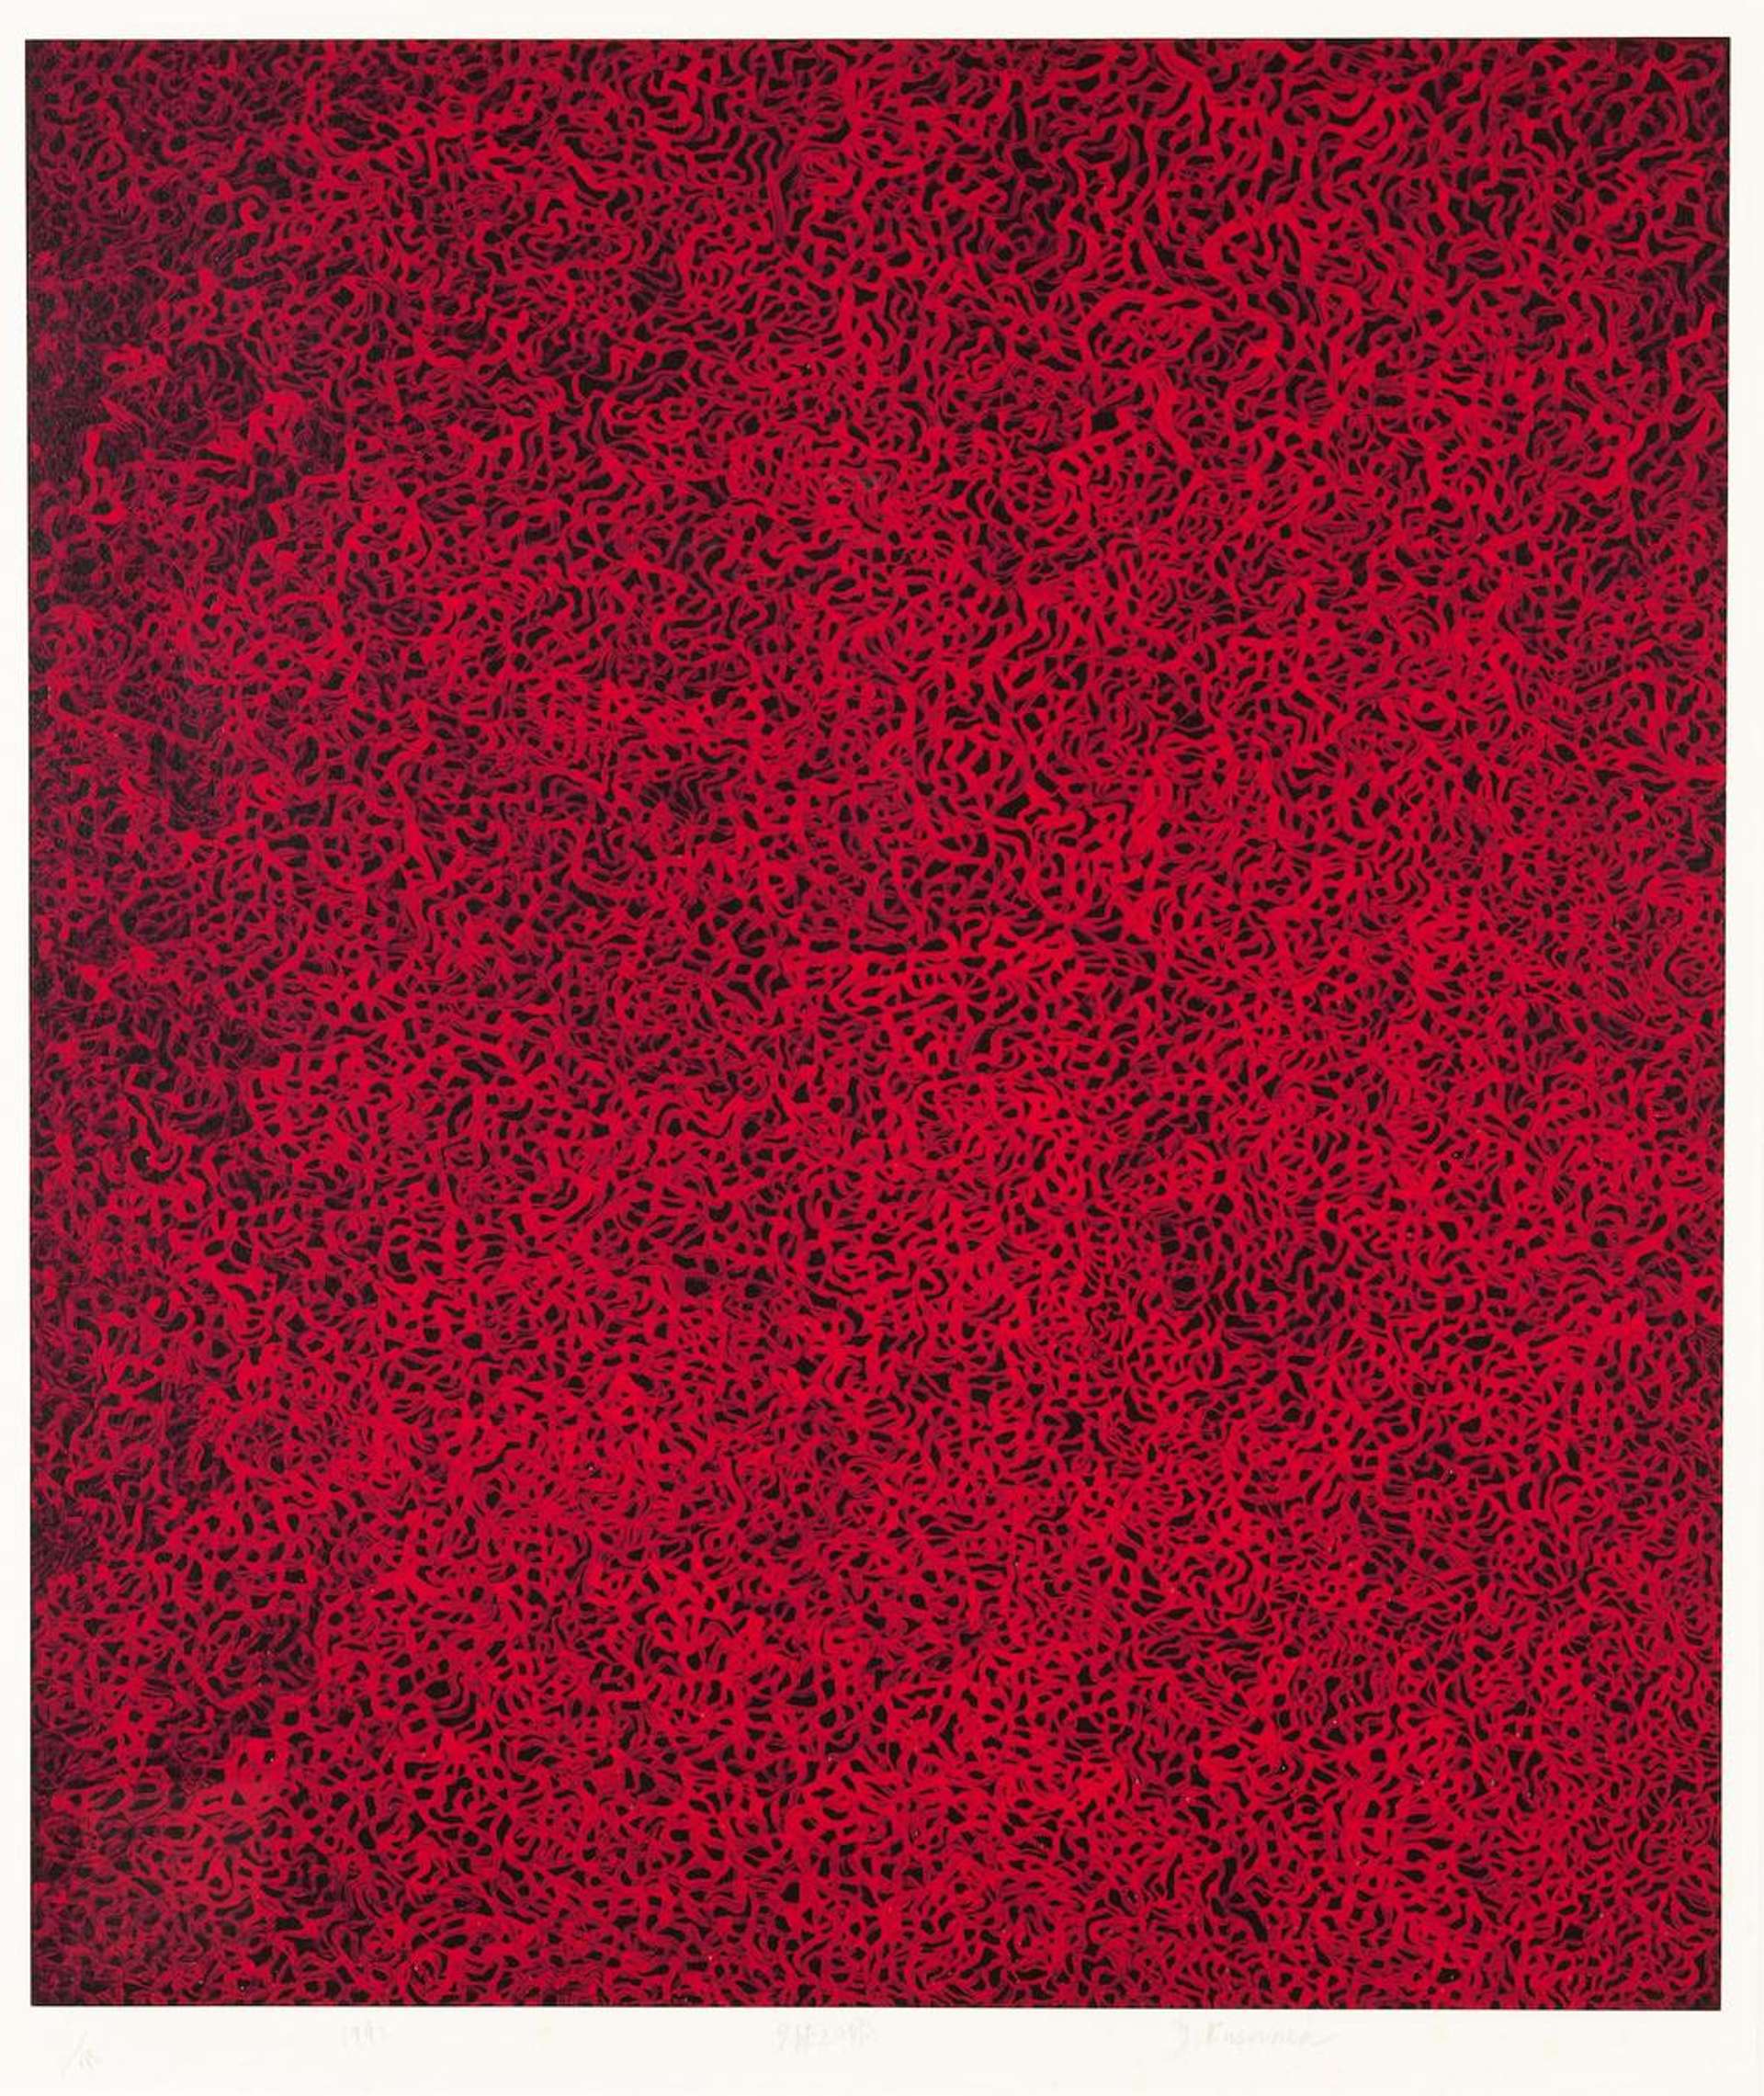 Yayoi Kusama’s Rain In The Evening Glow. A screenprint of a continuous pattern of red lines against a black background